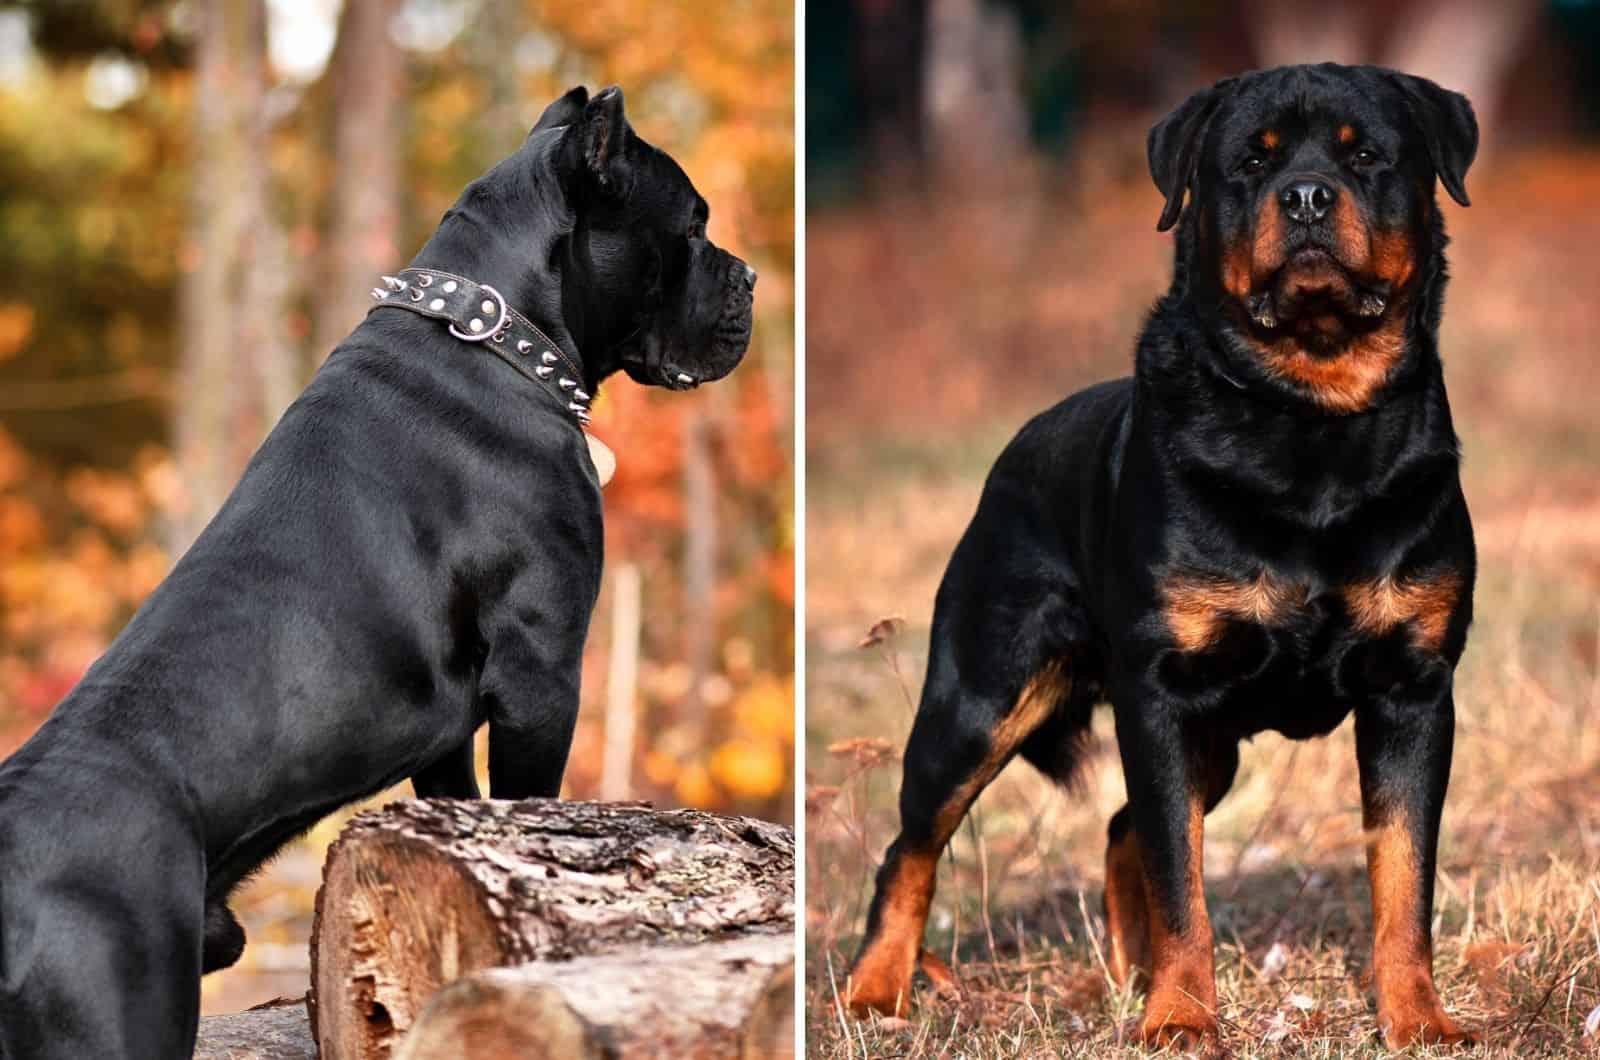 Cane Corso Vs Rottweiler: Which One Is The Better Guard Dog?